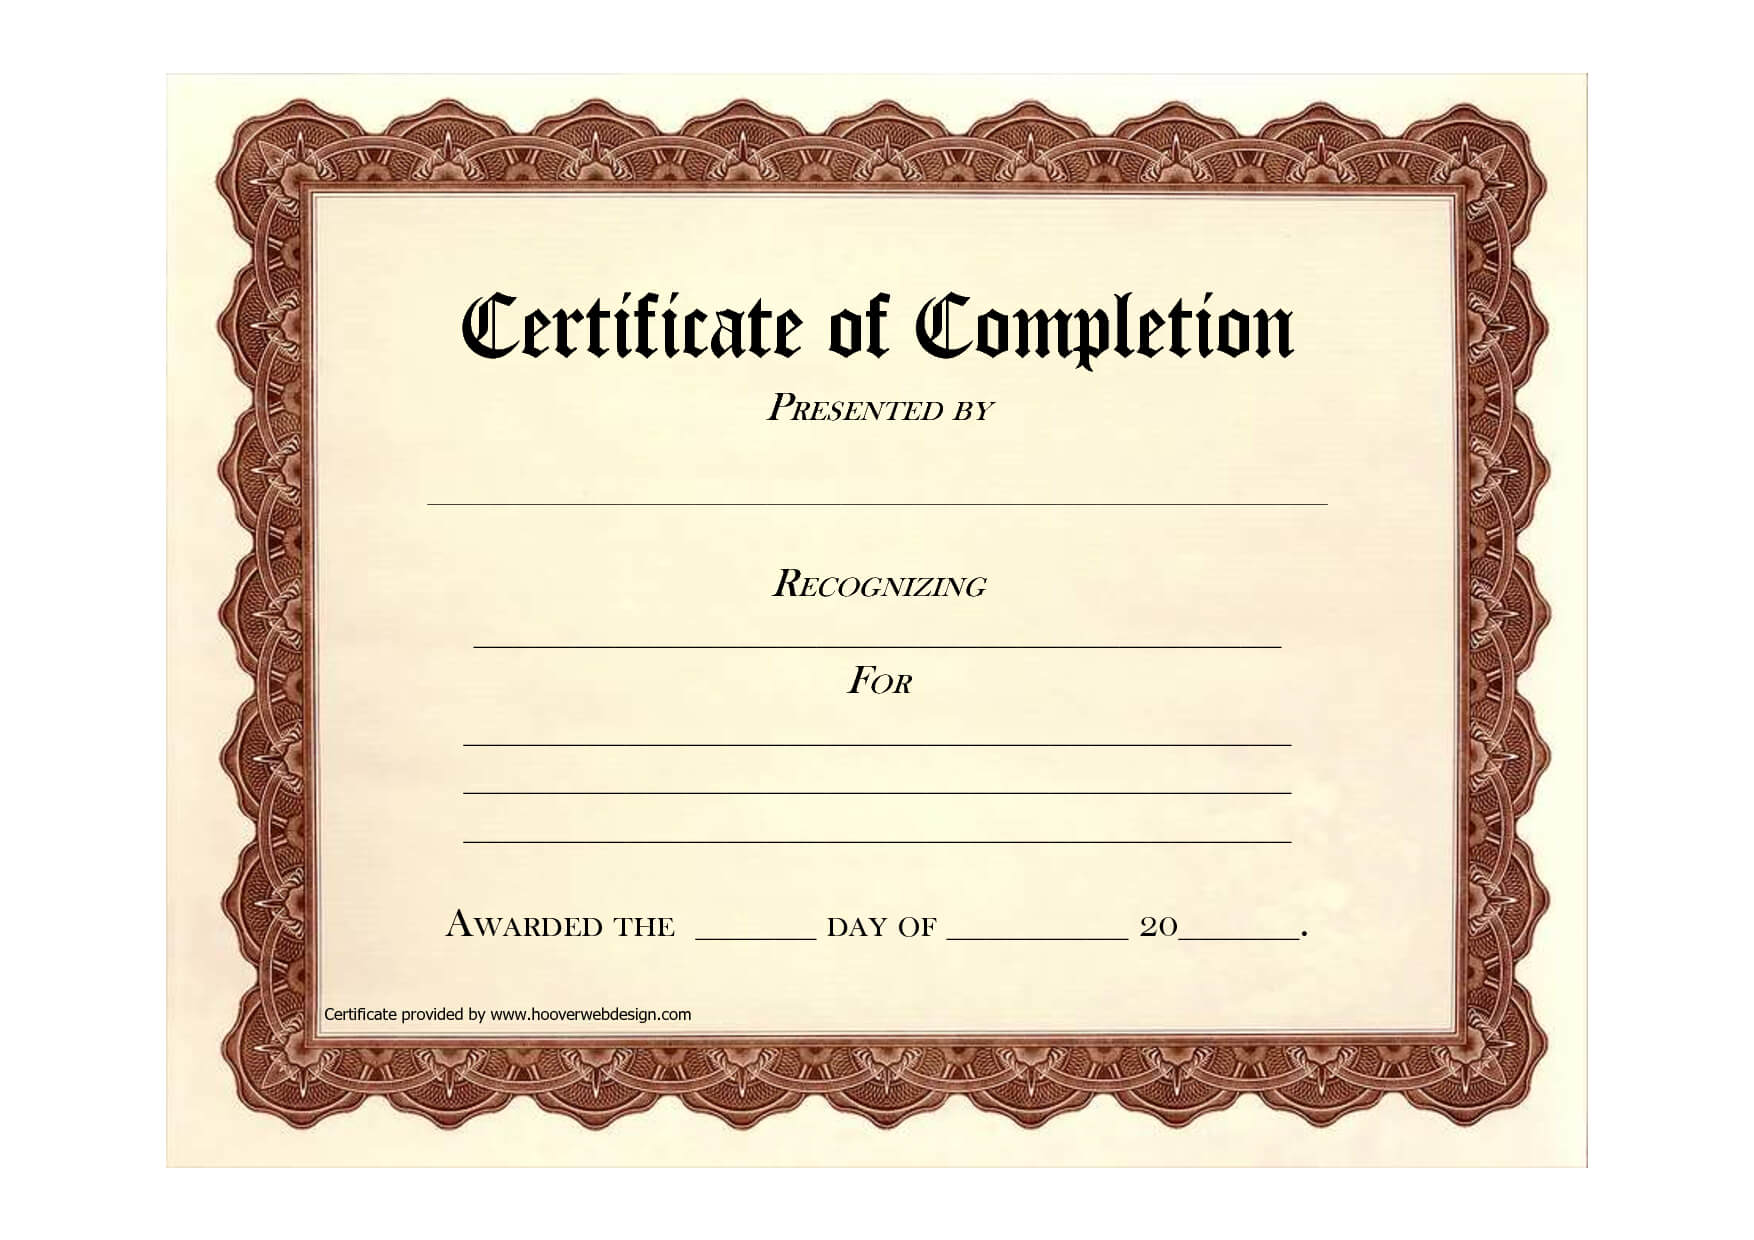 Free Printable Certificates | Certificate Templates Inside Certificate Of Completion Template Free Printable